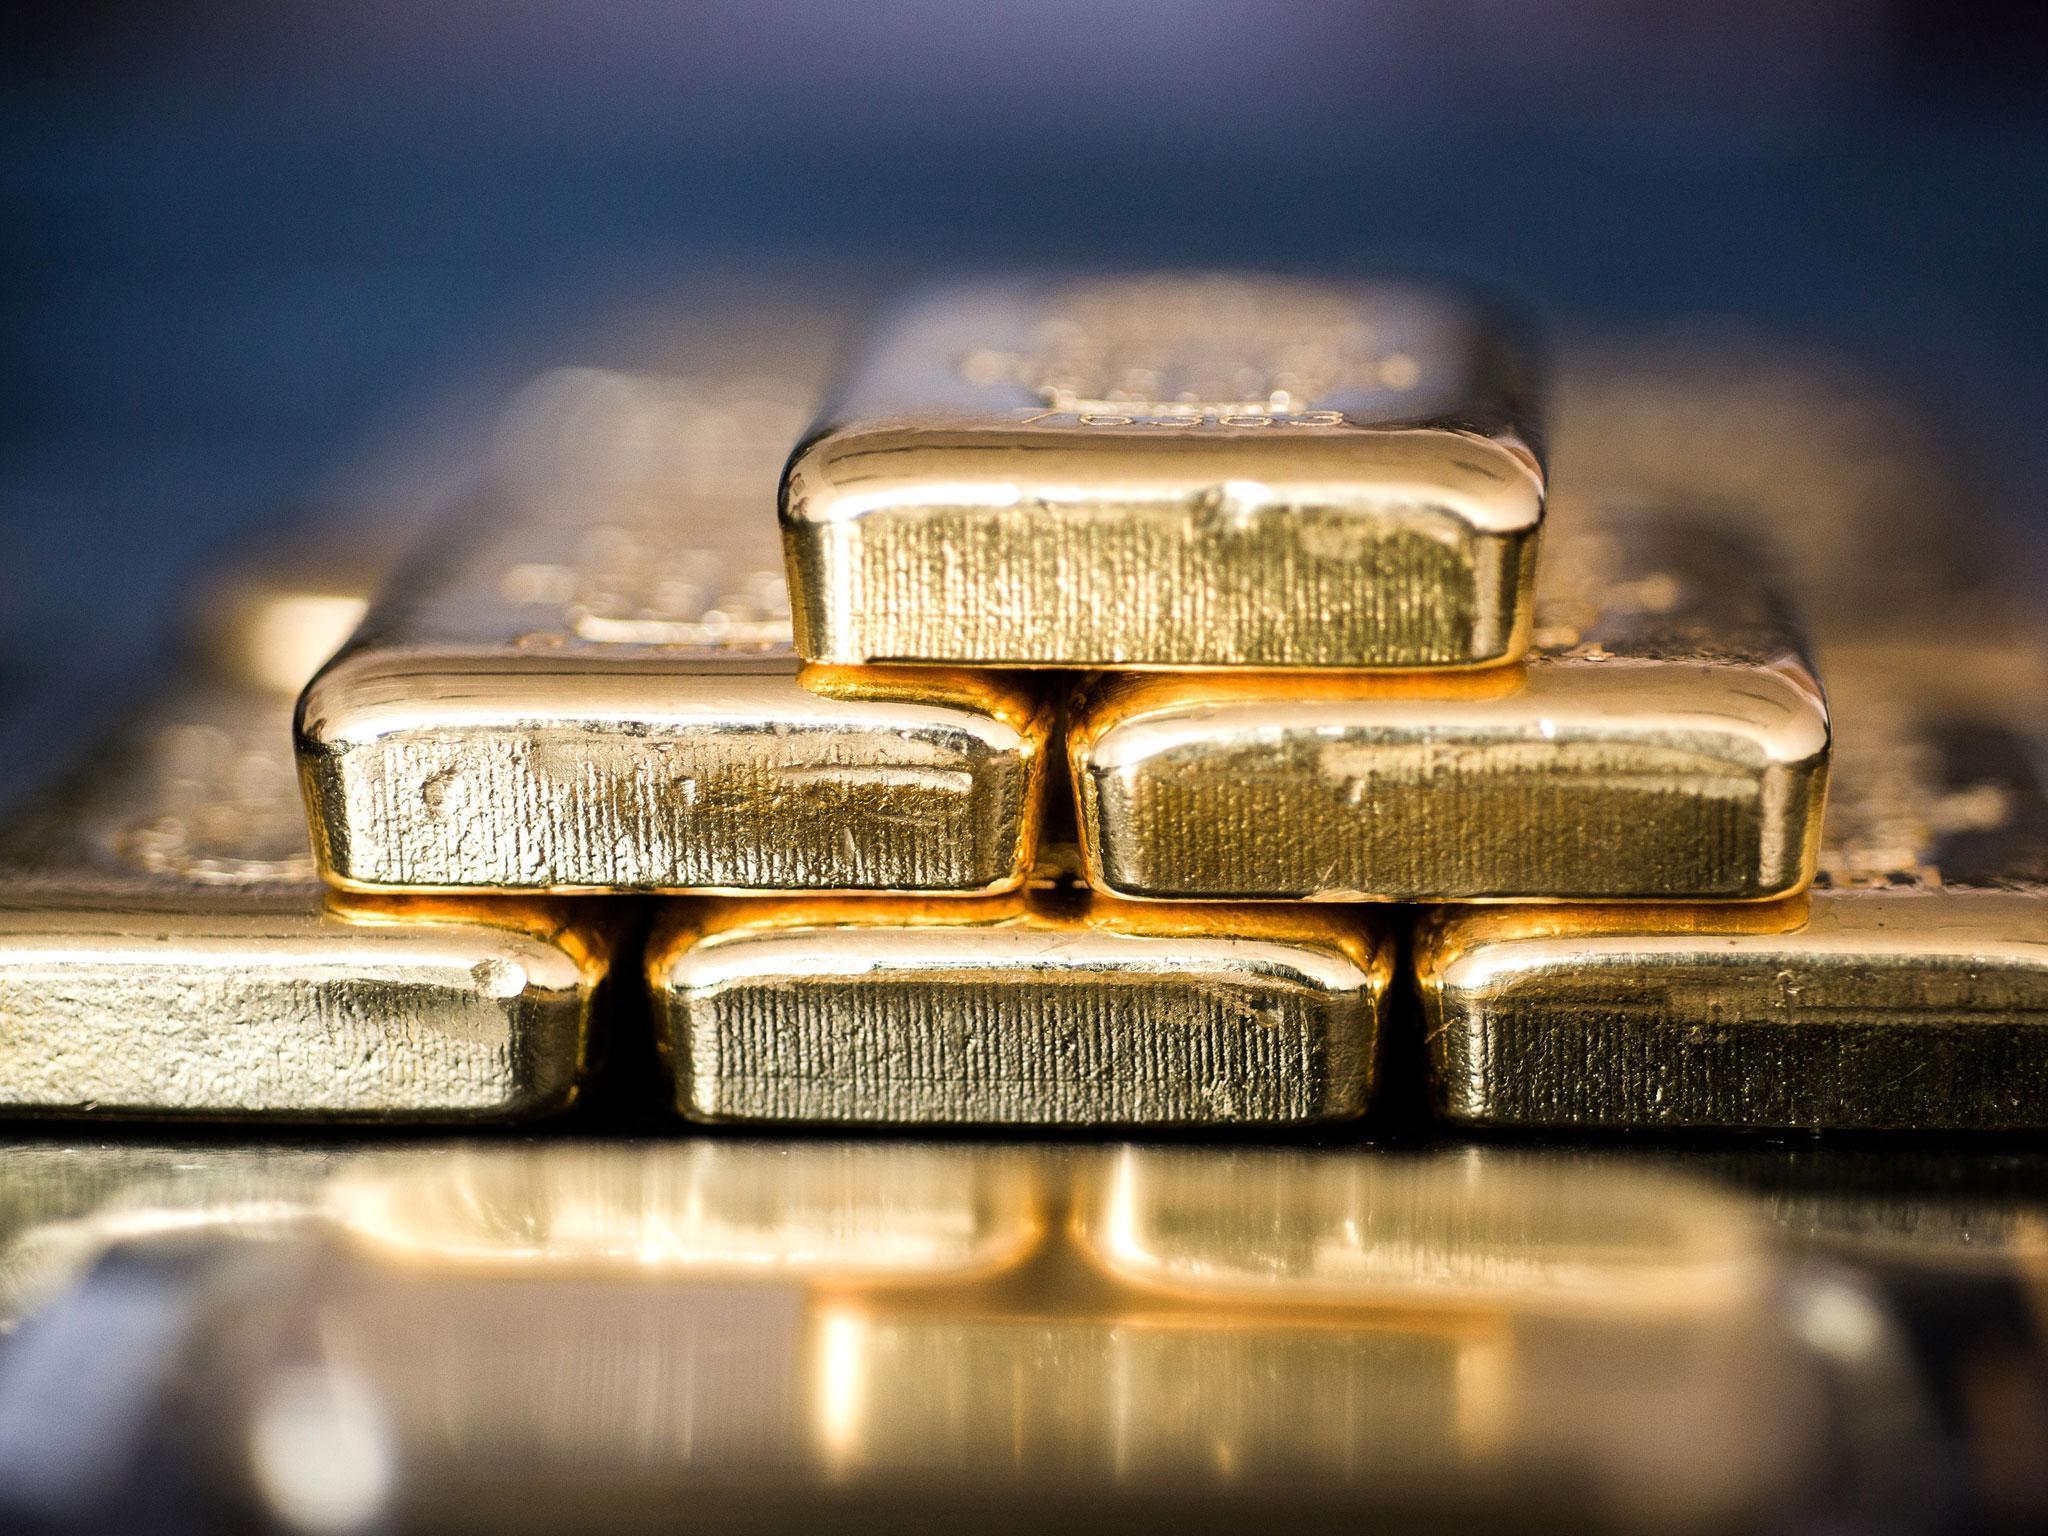 Since 2016, demand for precious metals has risen. Gold is a favourite, according to Chris Howard, director of the bullion at the Royal Mint